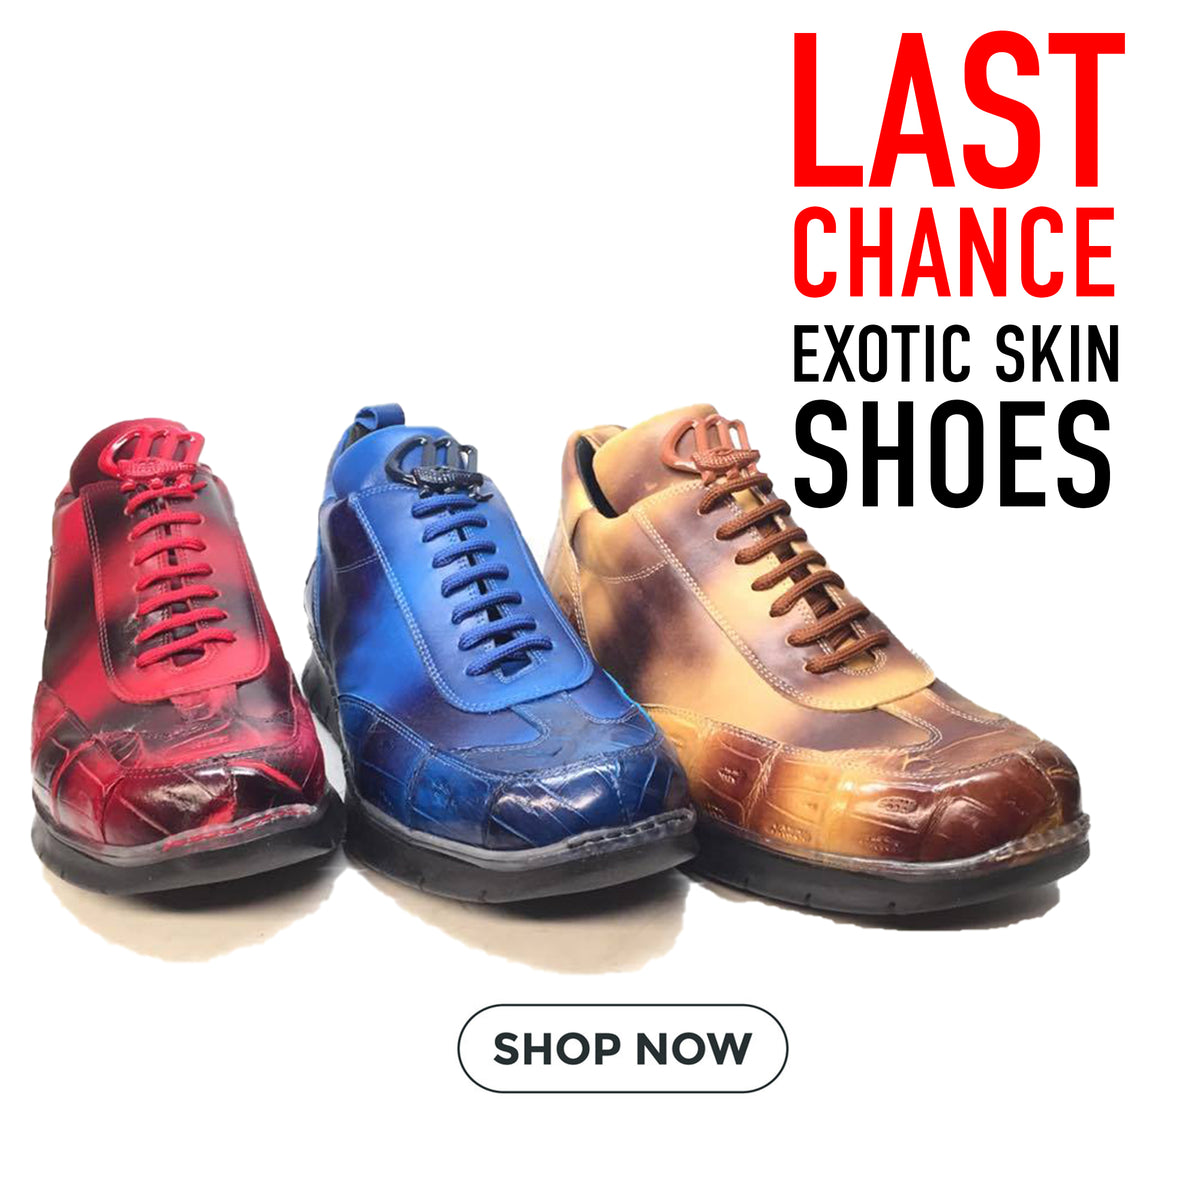 Last Chance Exotic Skin Shoes